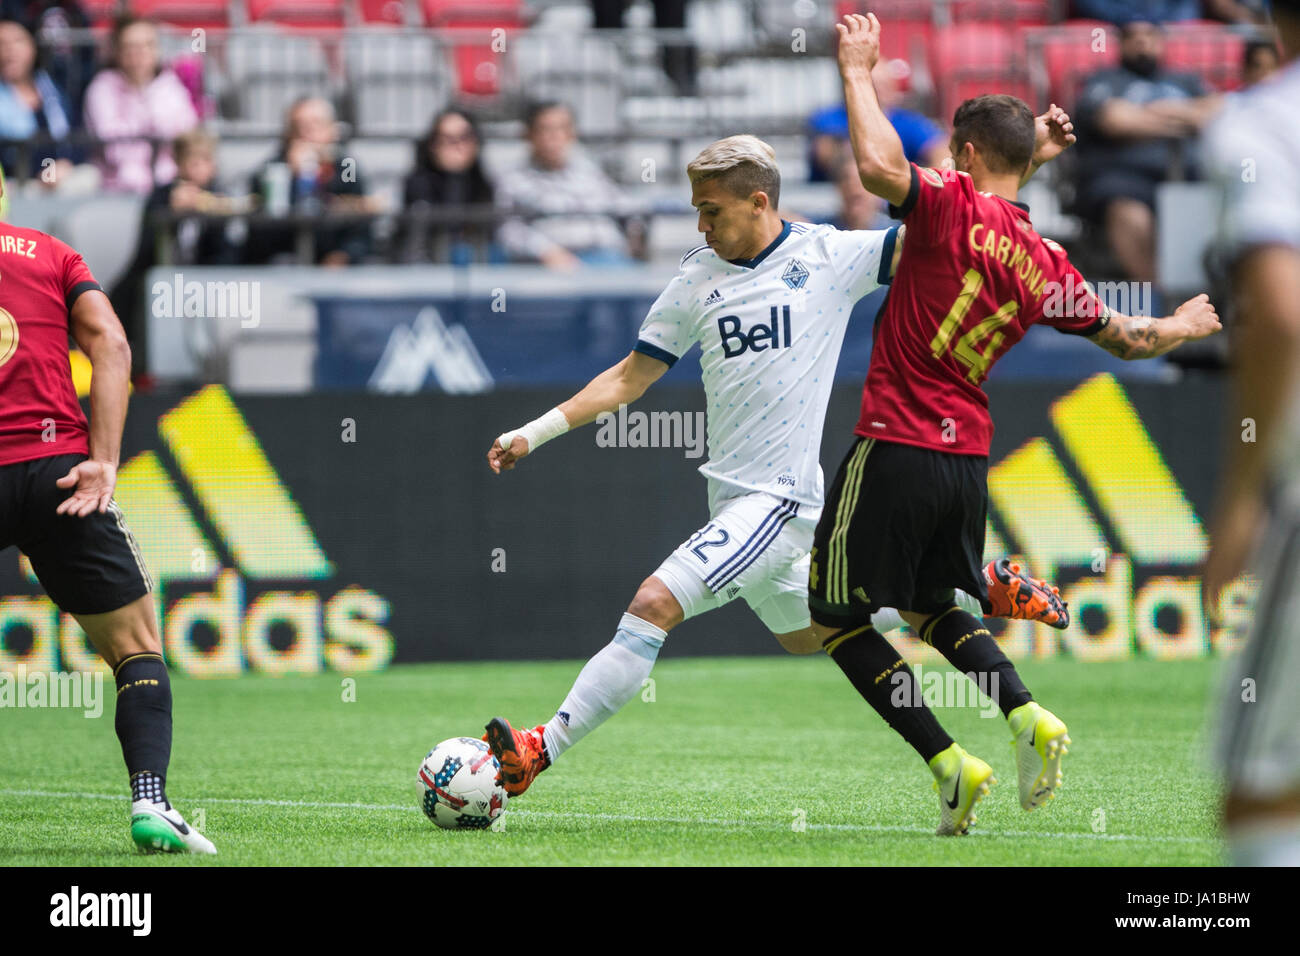 Vancouver, Canada. 3 June 2017. Fredy Montero (12) of Vancouver Whitecaps keeping the ball away from Carlos Carmona (14) of Atlanta United. Vancouver defeat Atlanta 3-1. Vancouver Whitecaps vs Atlanta United BC Place Stadium.  © Gerry Rousseau/Alamy Live News Stock Photo